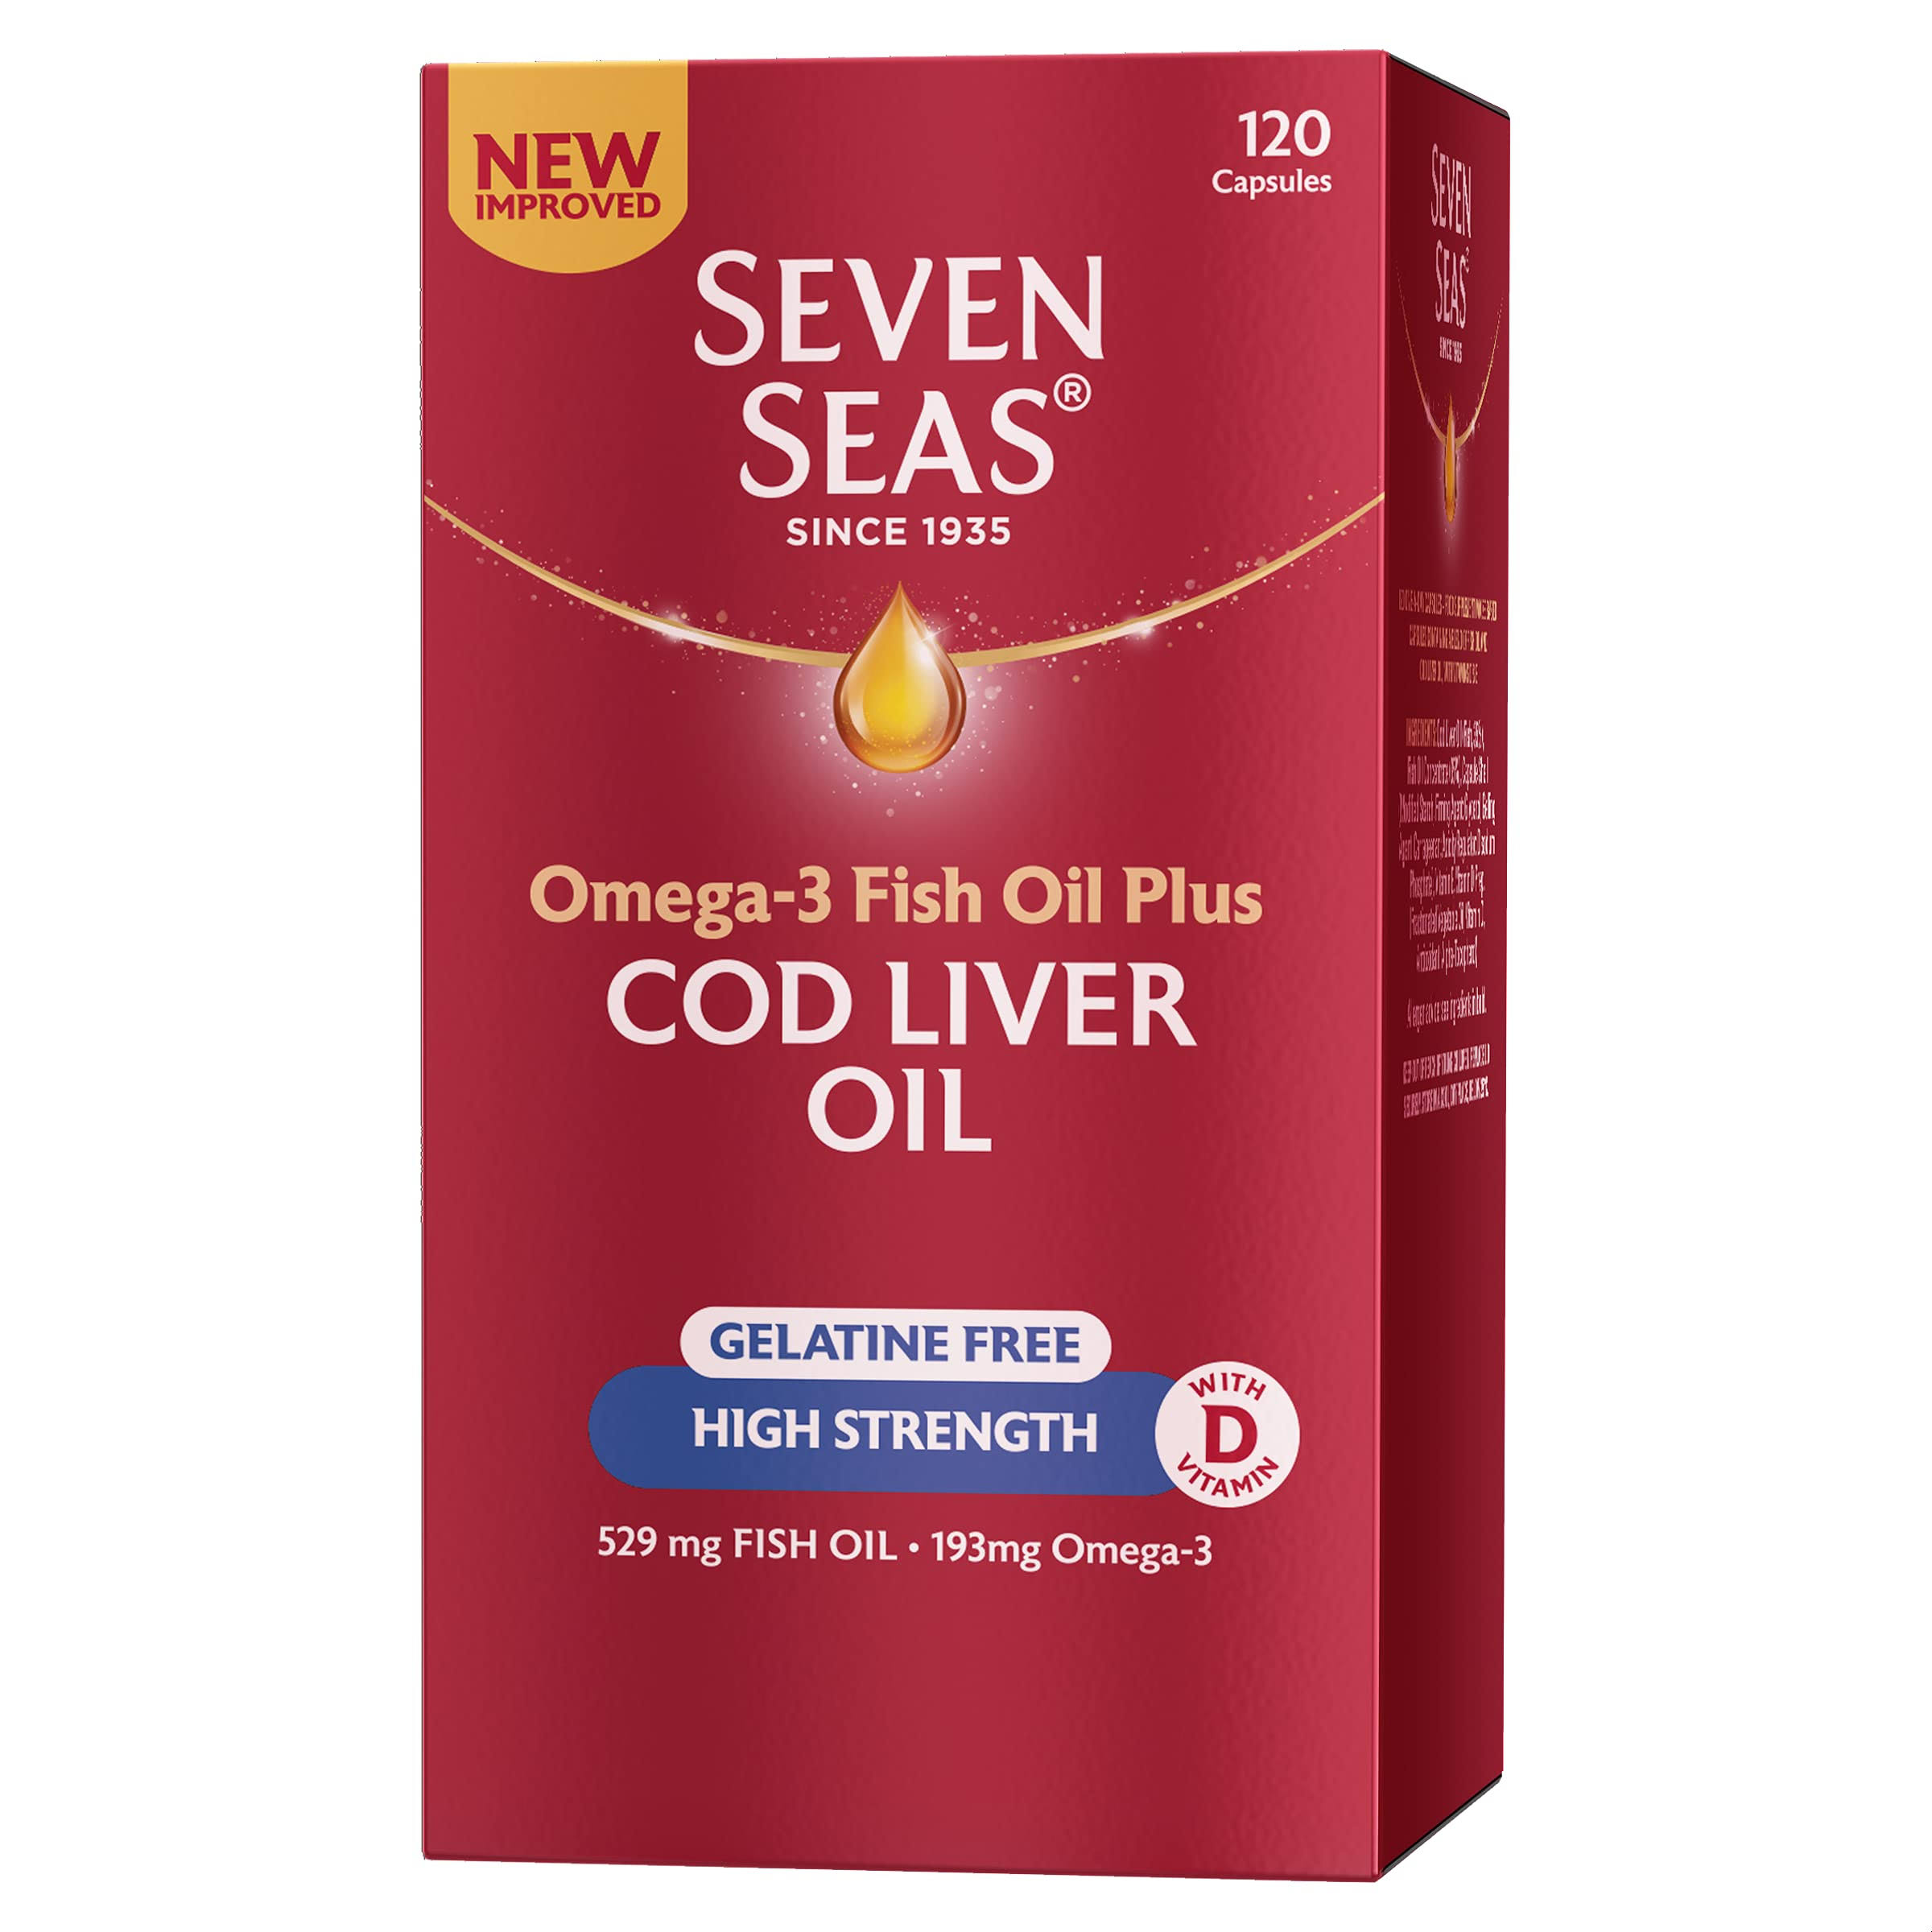 Seven Seas High Strength Pure Cod Liver Oil Supplement - 120 Capsules